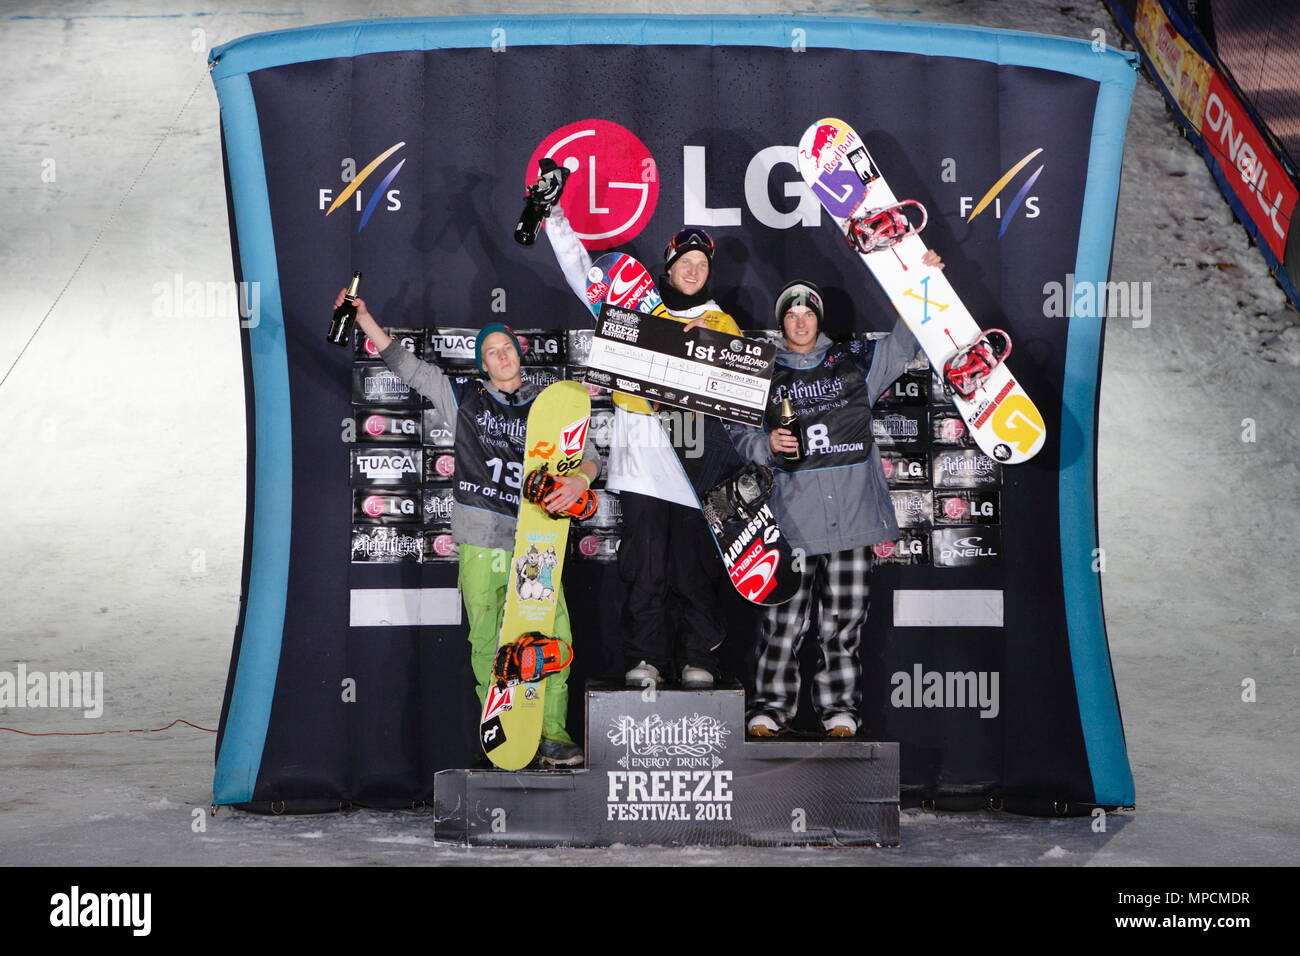 UK Sport - Relentless Freeze Festival, Winners and places of the LG Snowboard FIS World Cup take position on the podium - 1st Janne Korpi FIN, 2nd Seppe Smits BEL and 3rd Joris Ouwerkerk NED. Battersea Power Station, London. 29 October 2011 Stock Photo